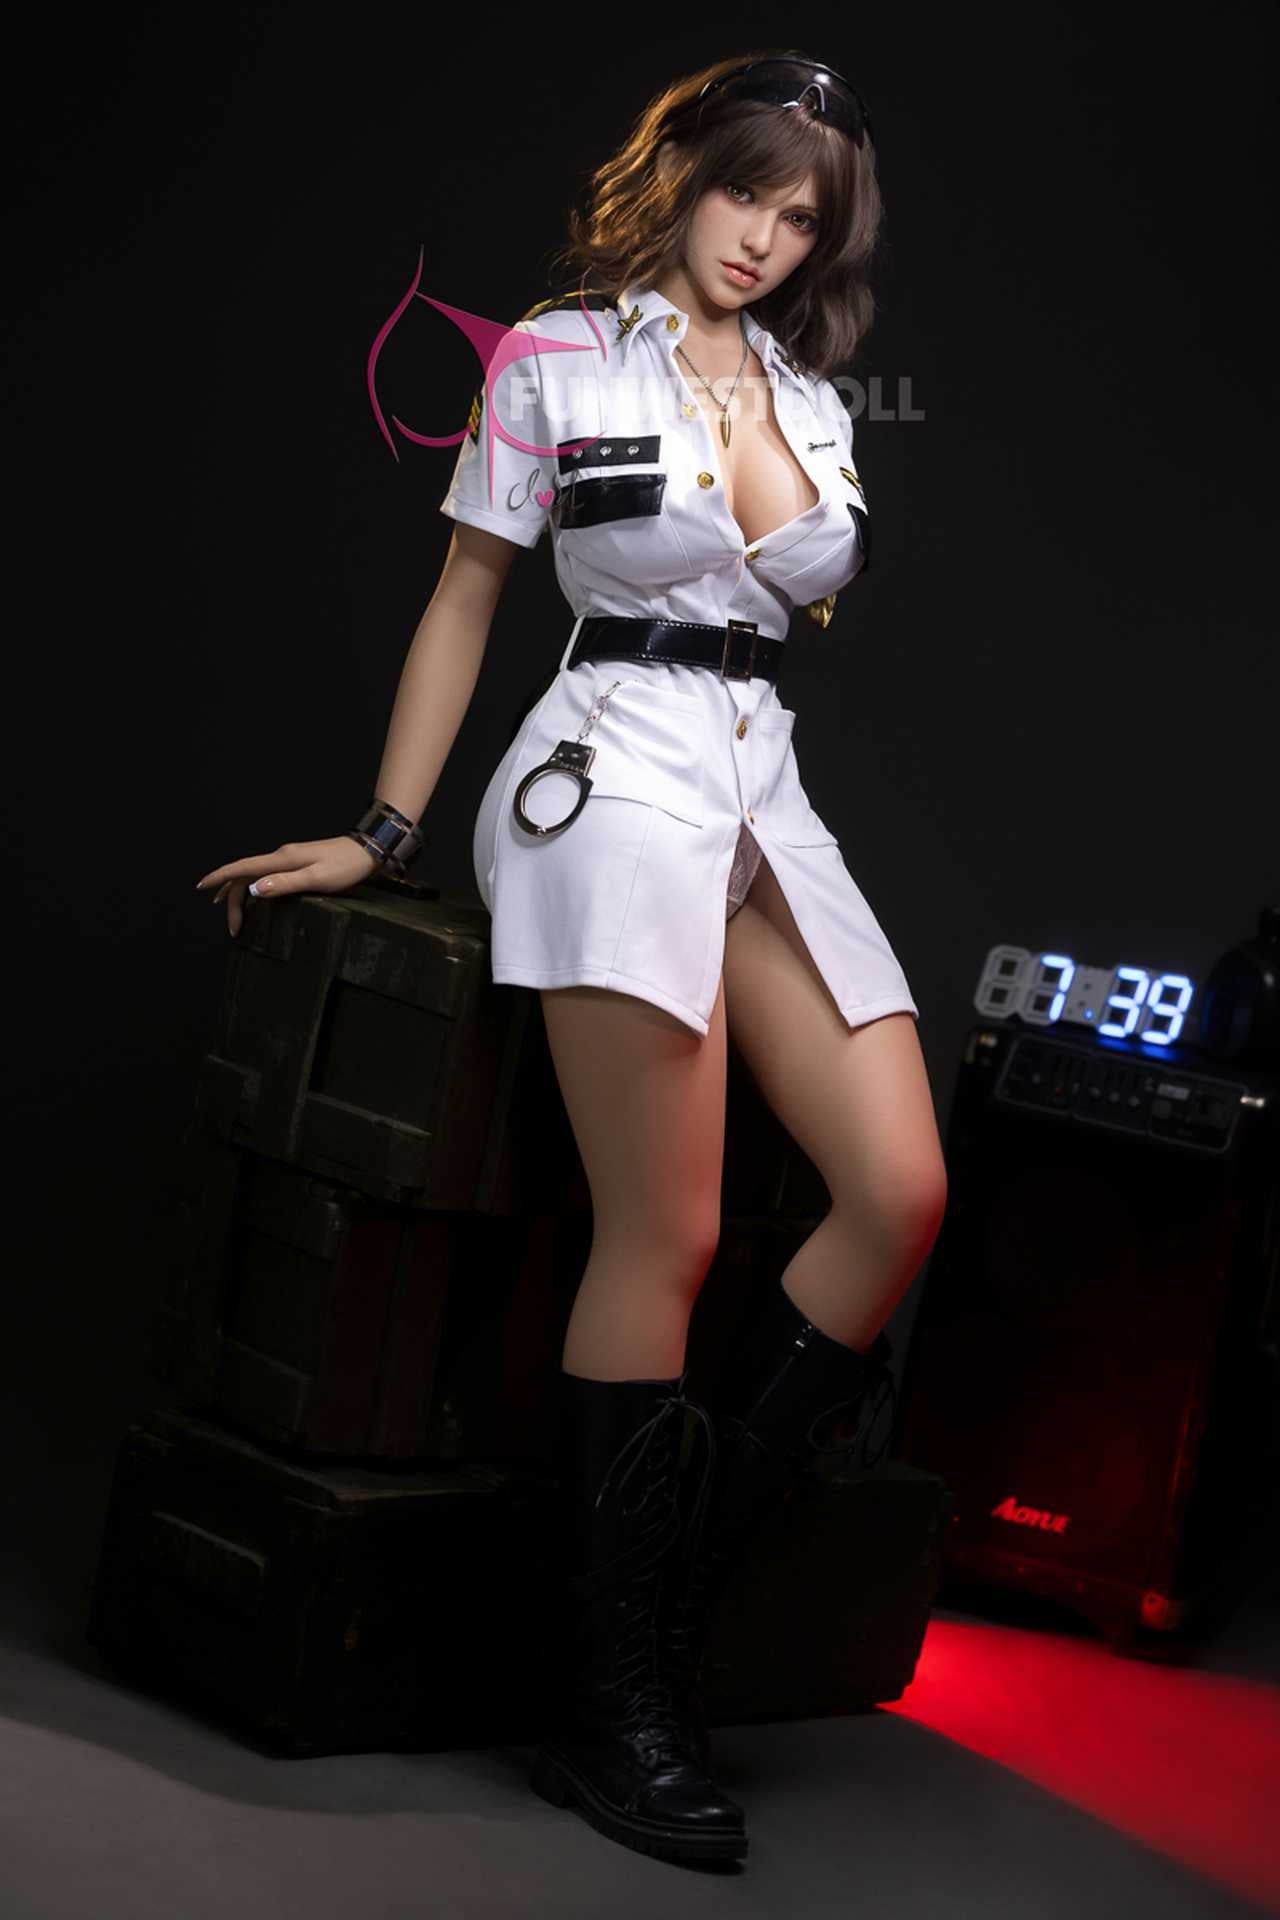 Funwest Vegas: Jet Fighter Sex Doll with G-Cup Breasts for Unforgettable Fun